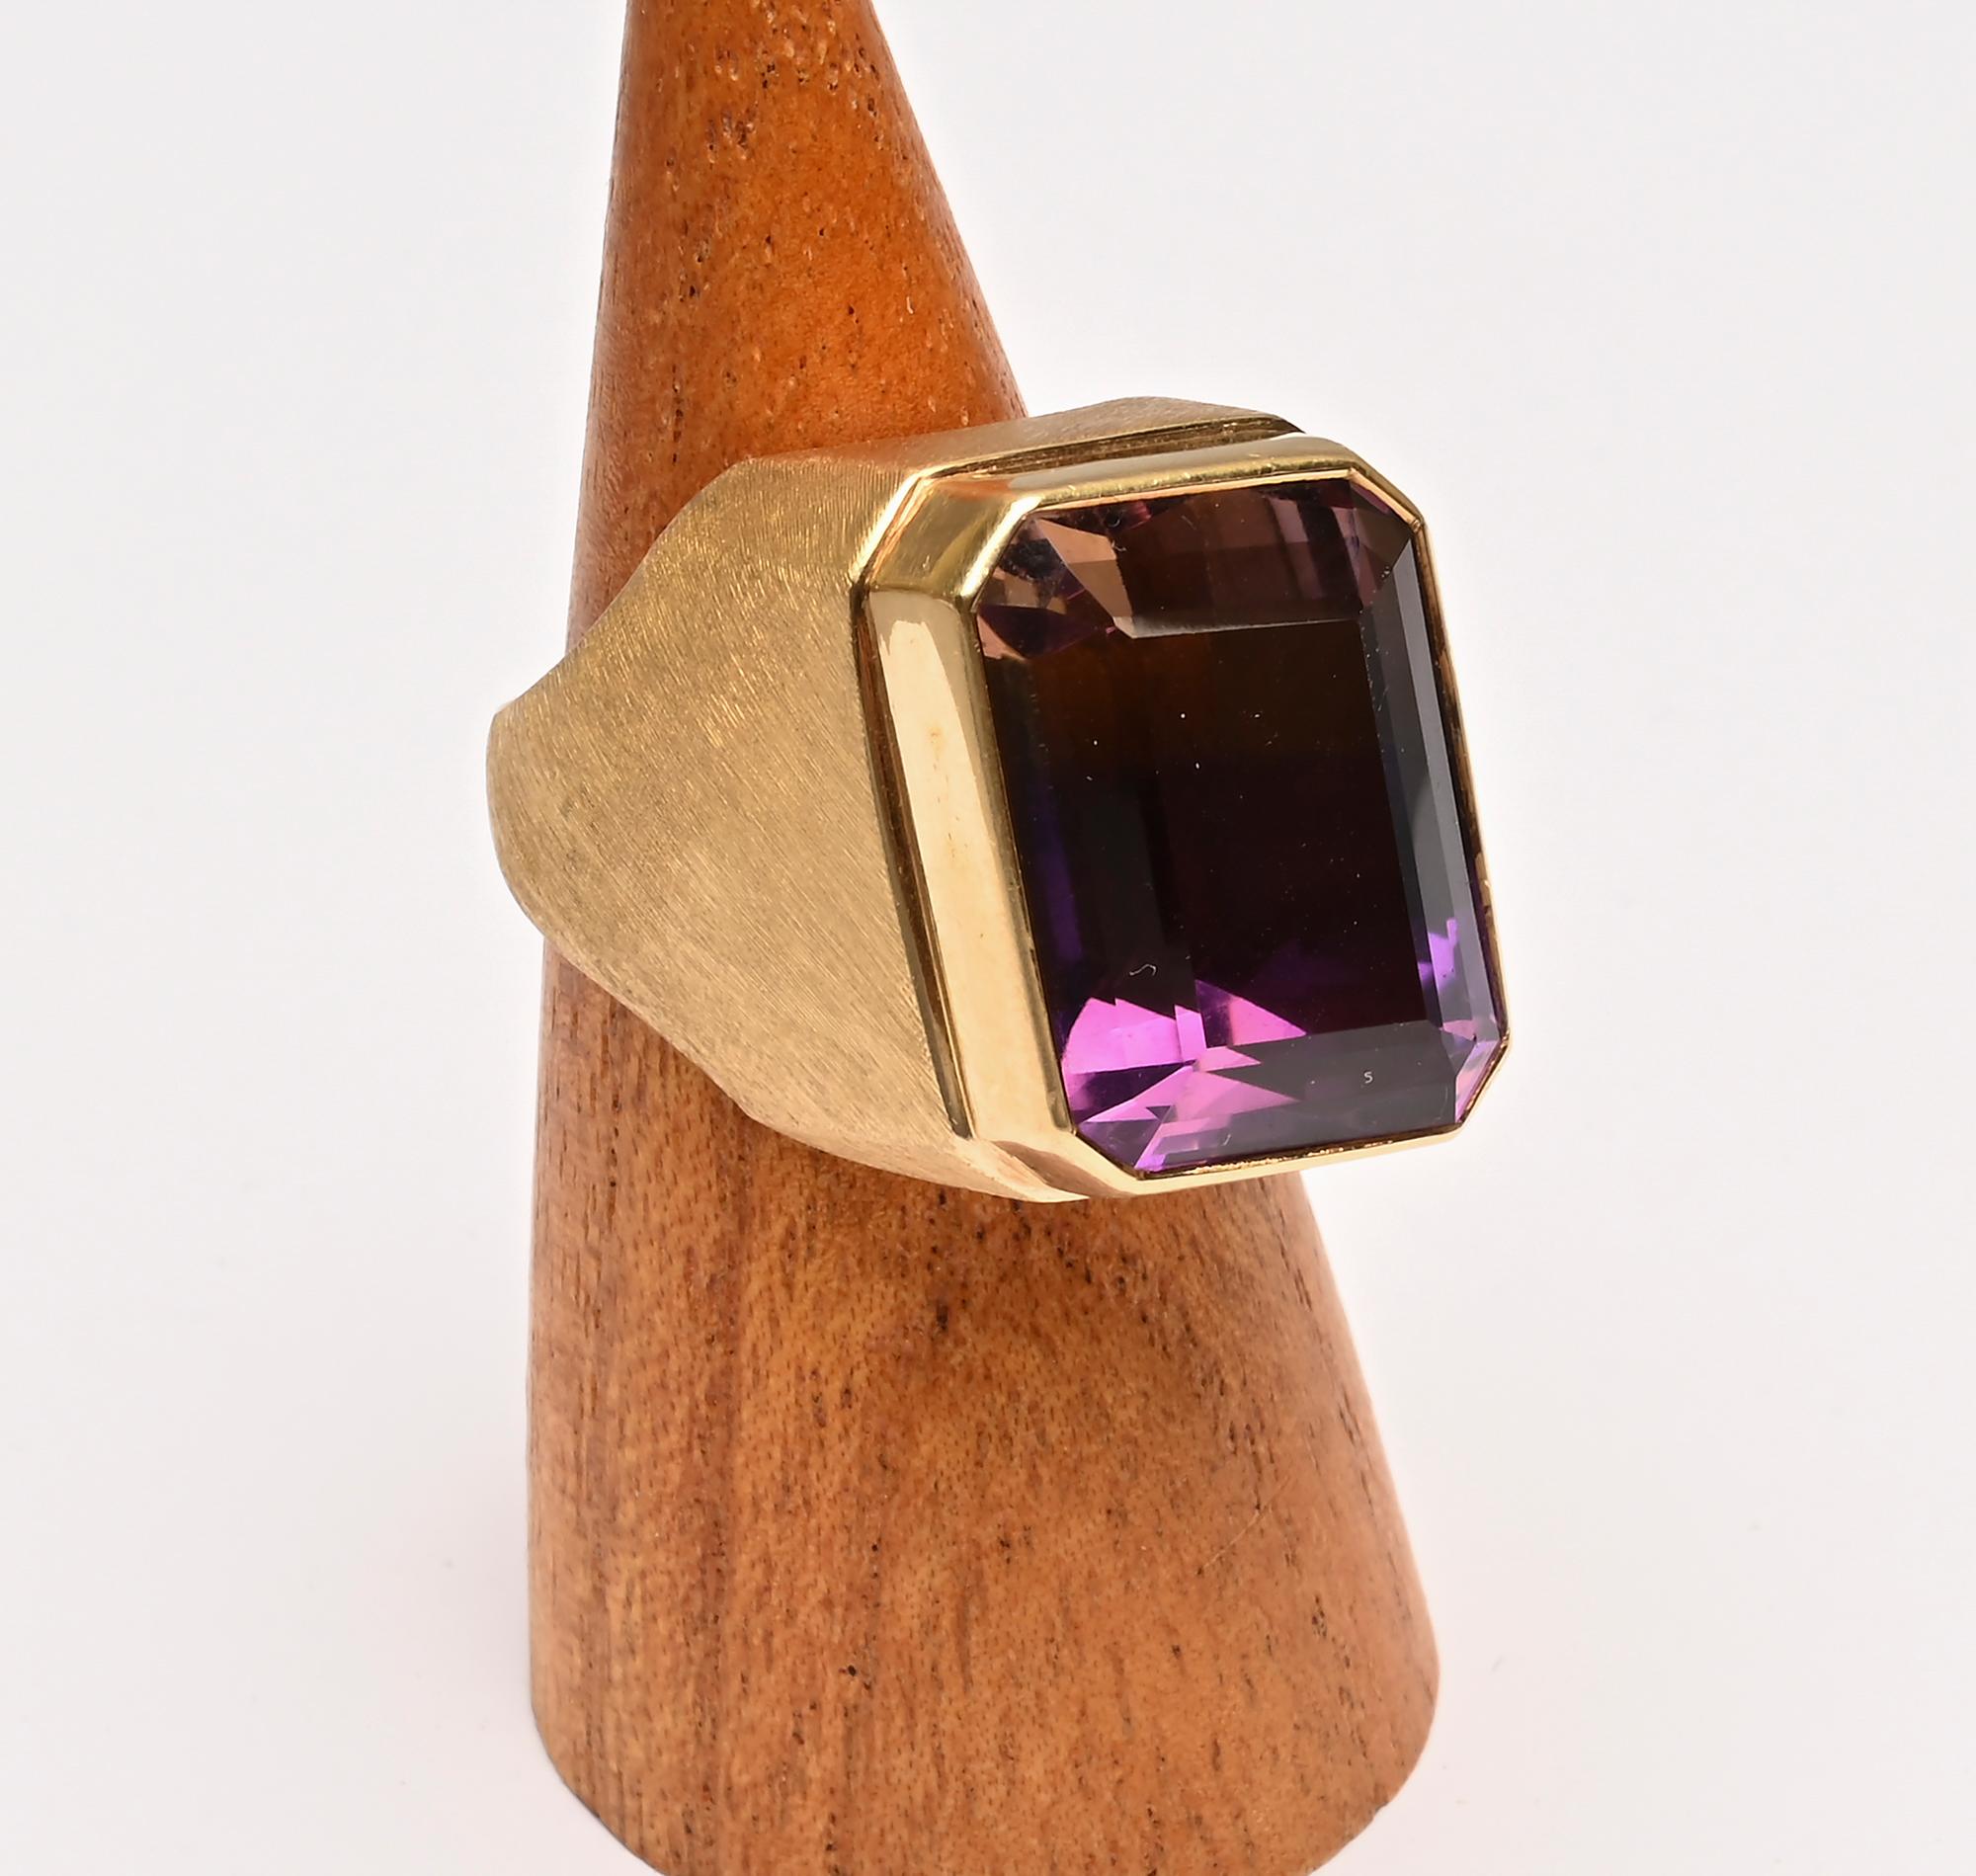 This stunning ring by Brazil's famous jeweler, Roberto Burle Marx is made with two unusual features. The stone is ametrine, a combination of amethyst and citrine that is found in nature. Second is that the stone is in the shape of a parallelogram.